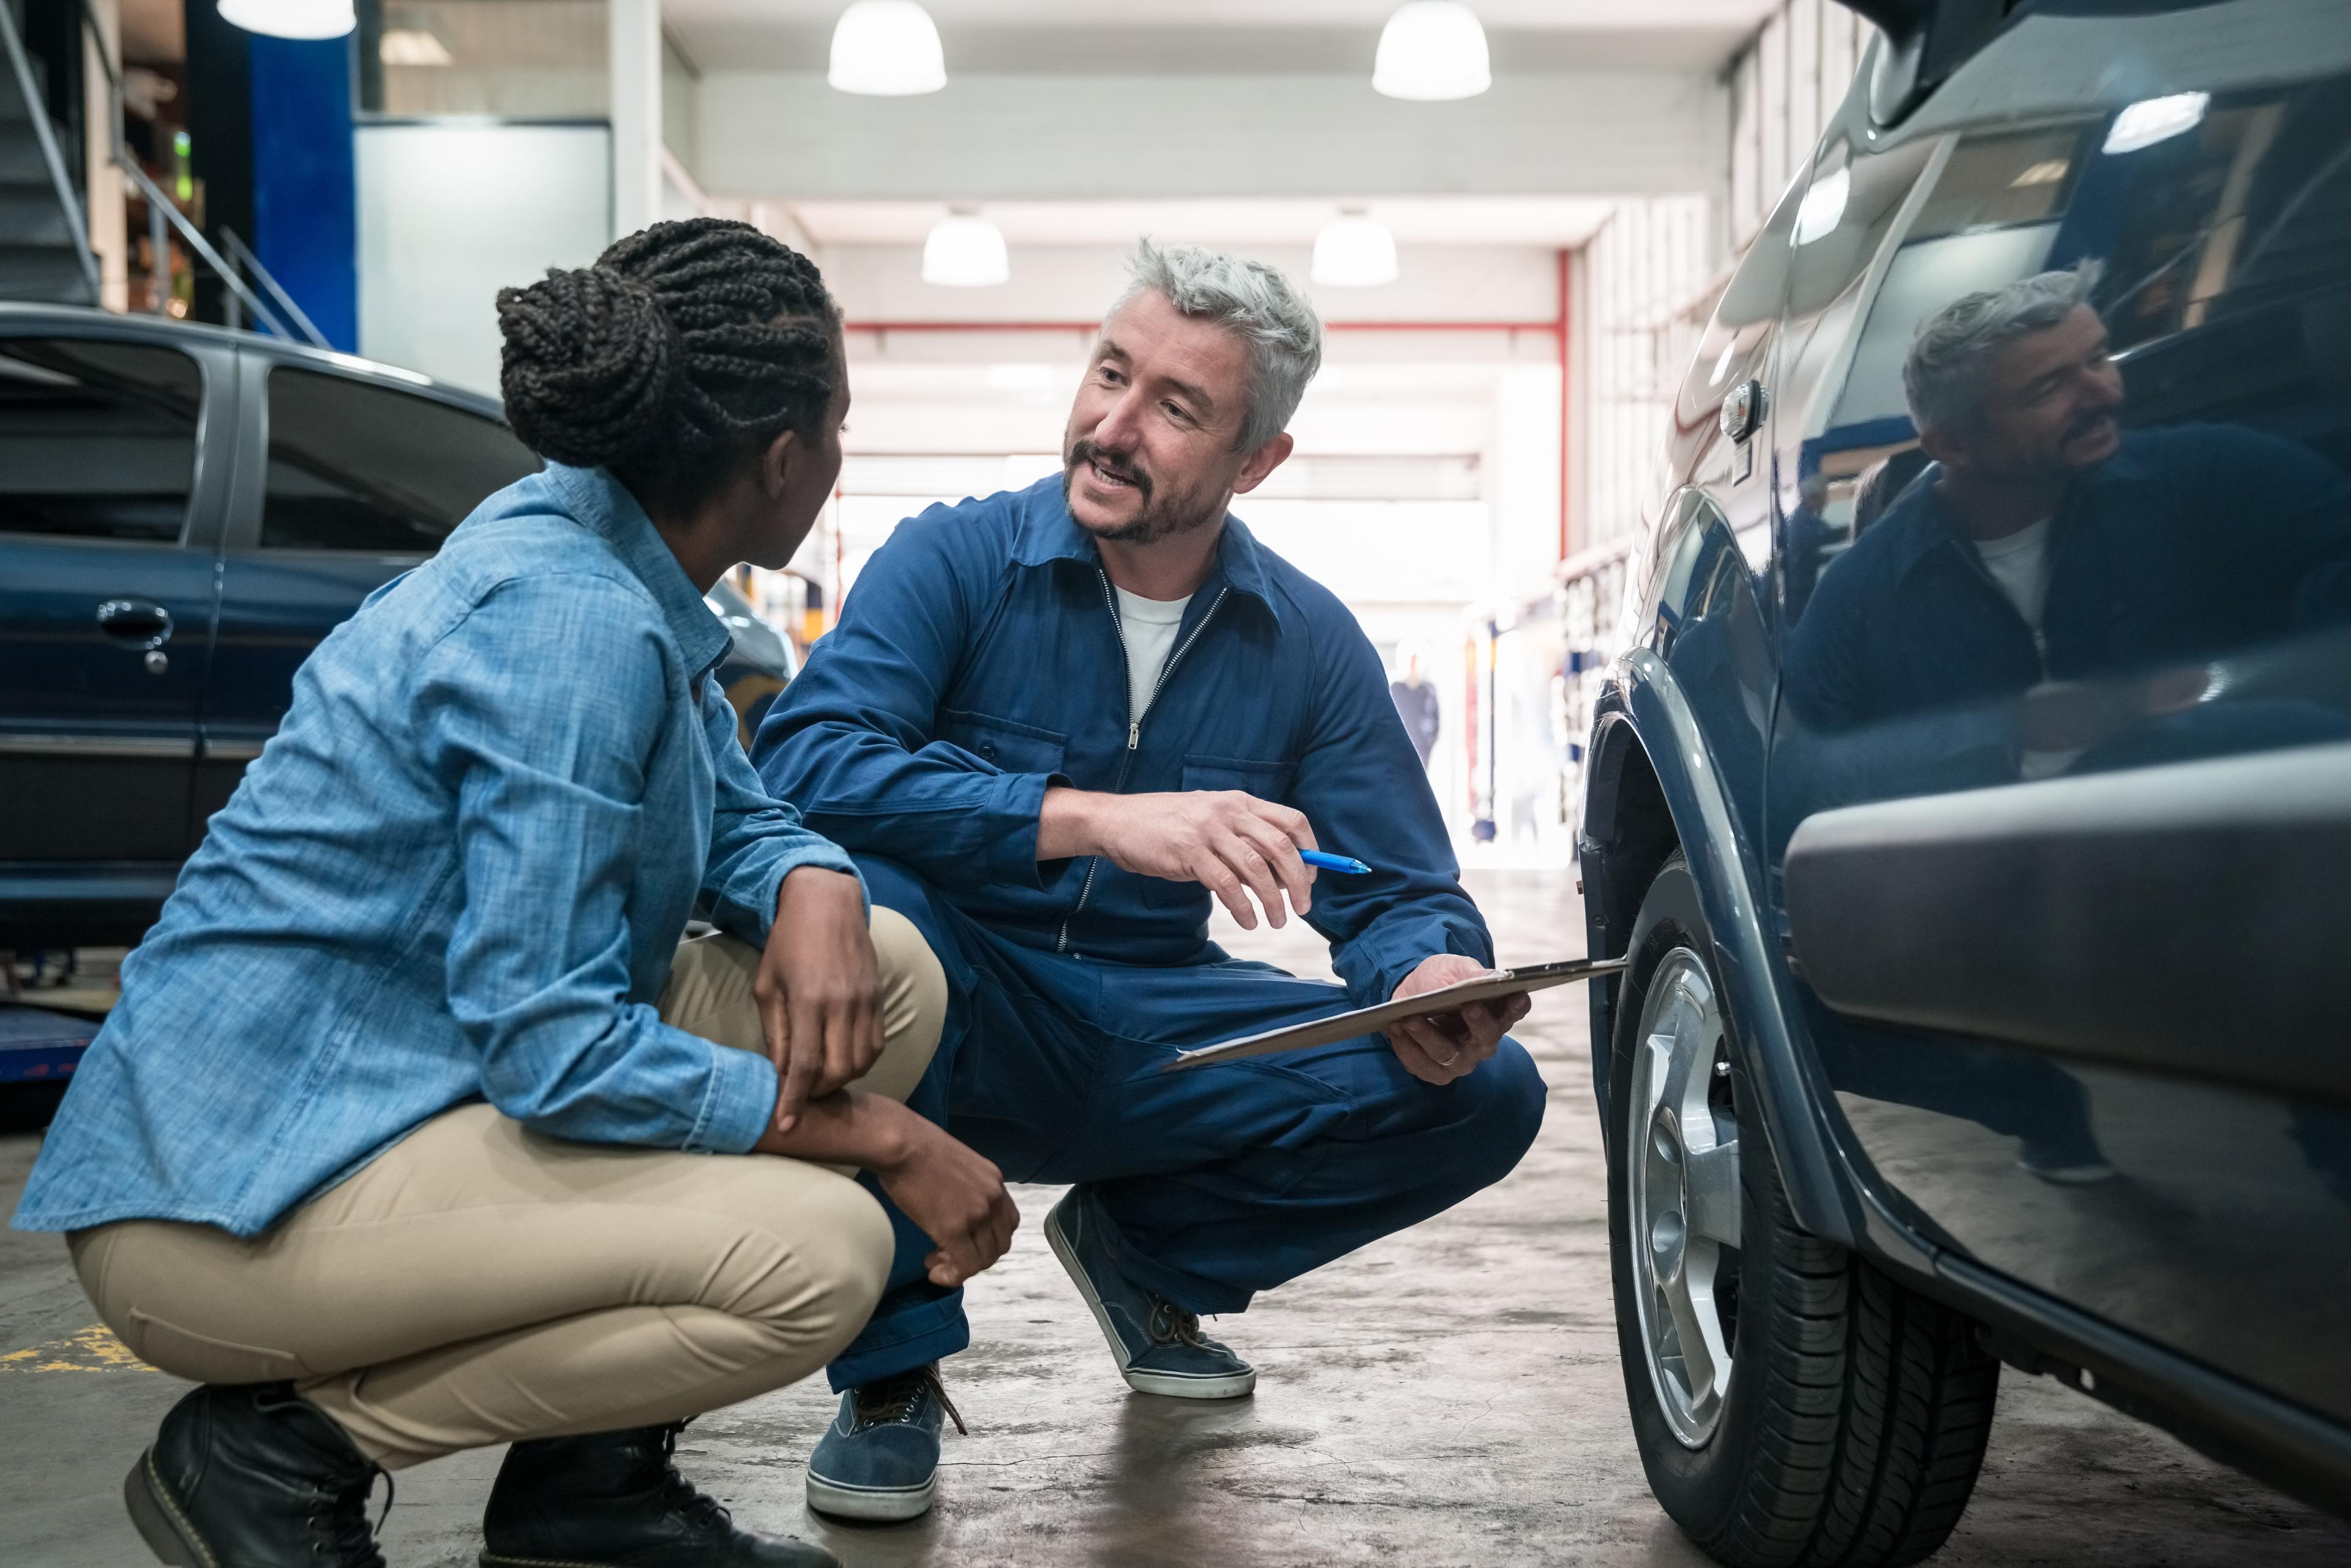 A man in blue overalls checking a car tyre with a woman dressed in a light blue shirt